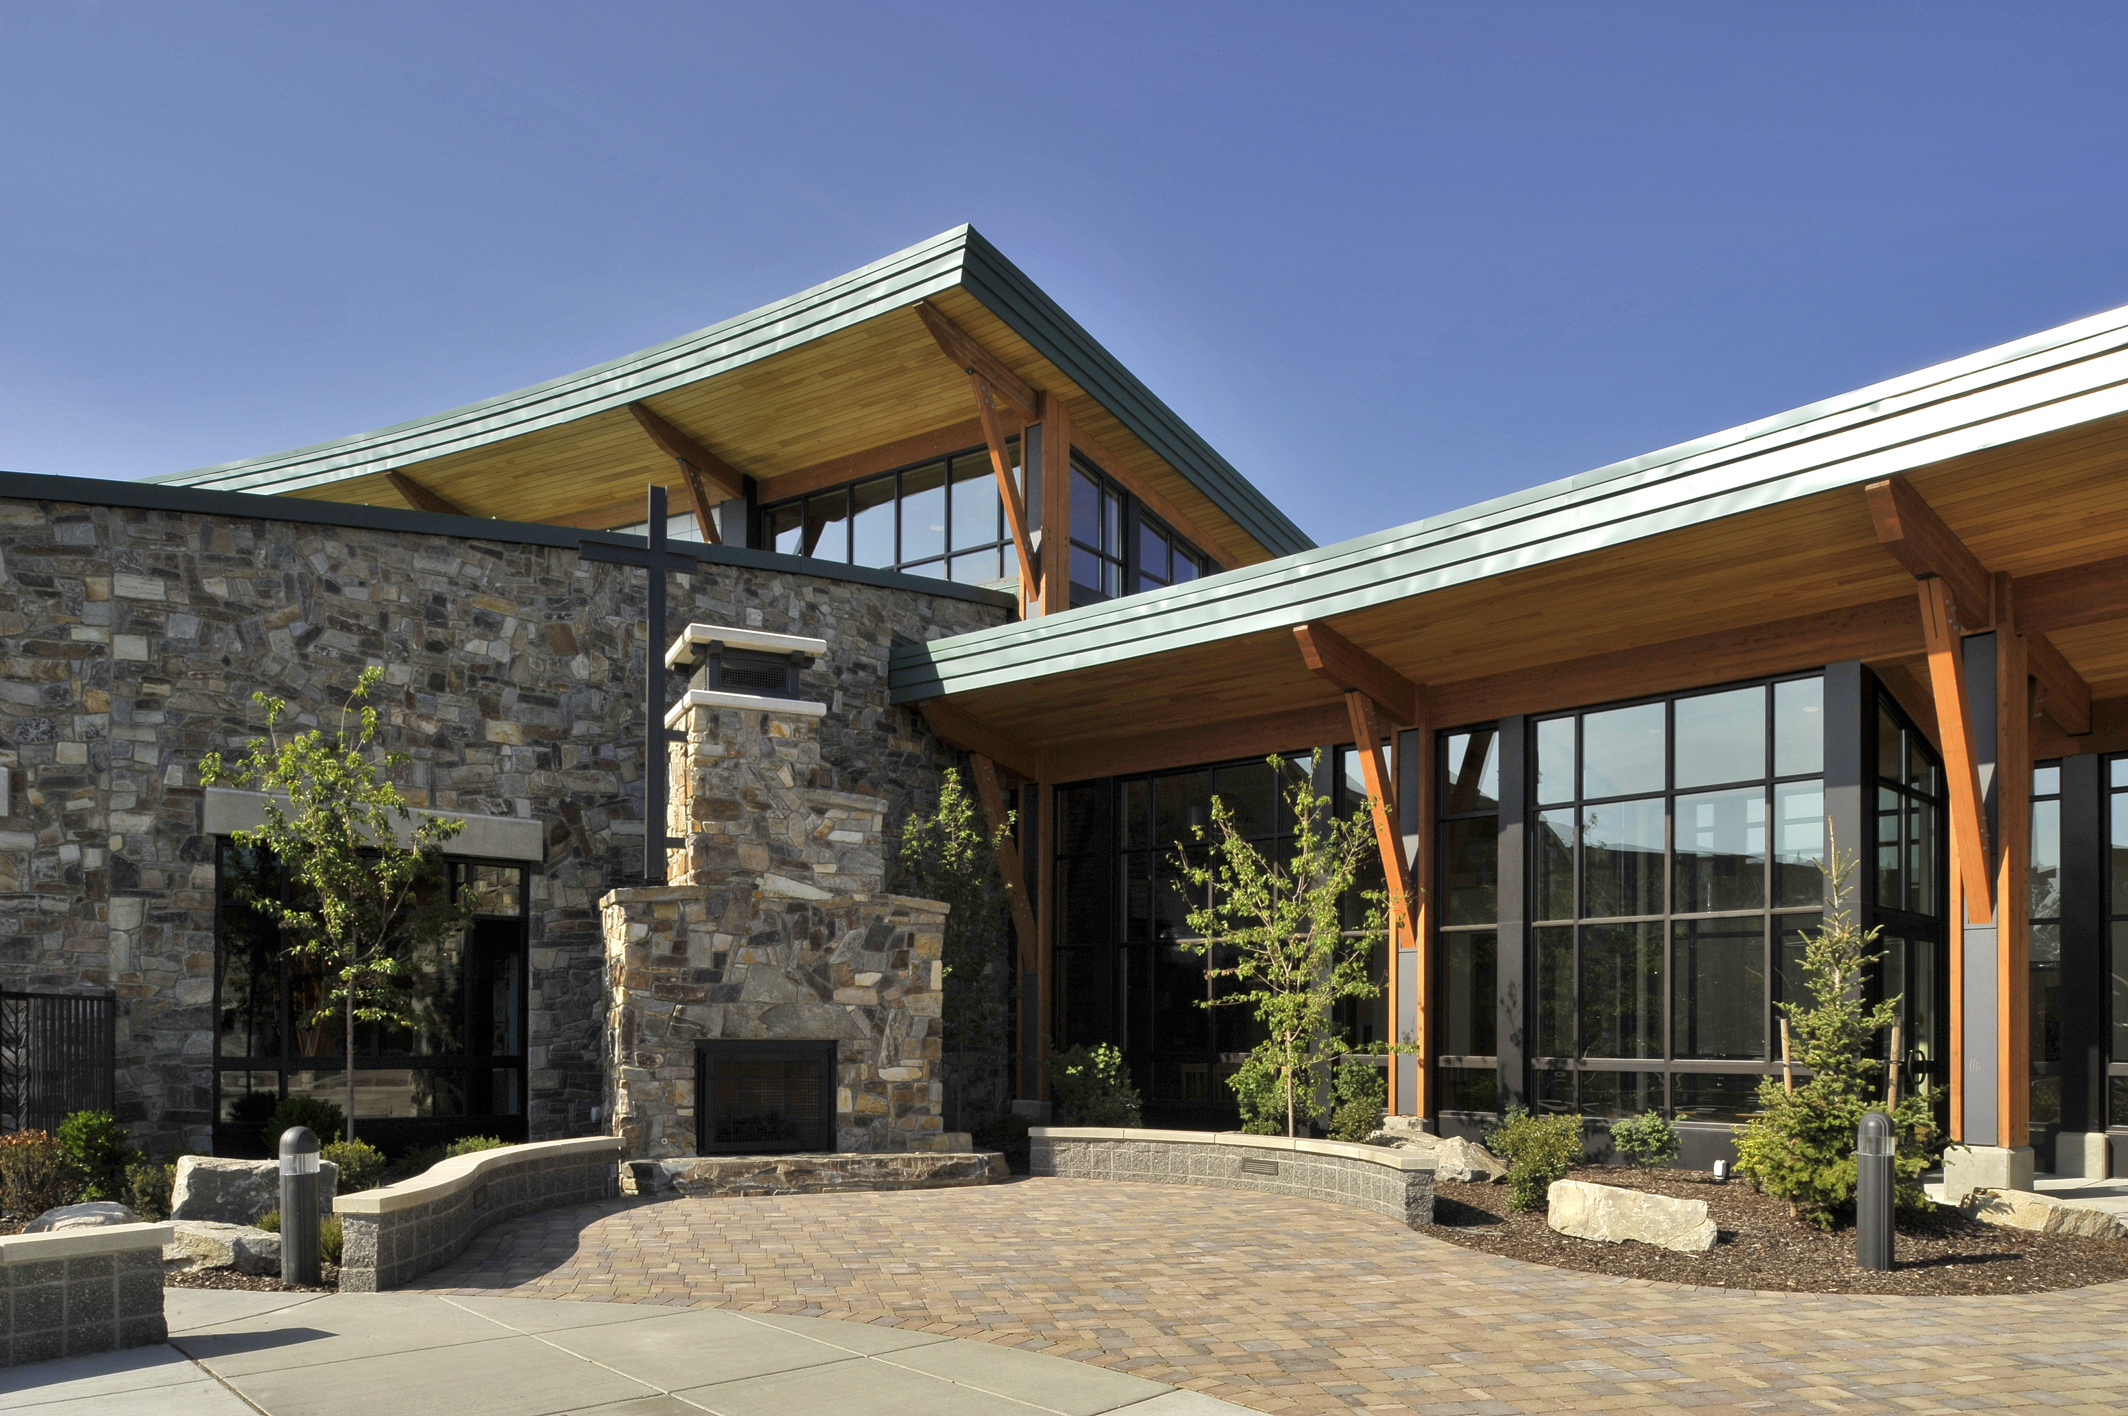 The Kroc Center is a community center located in Coeur d'Alene Idaho. The design includes state of the art aquatic pools, a gymnasium, community rooms, an aerobics studio, and a world class theater.